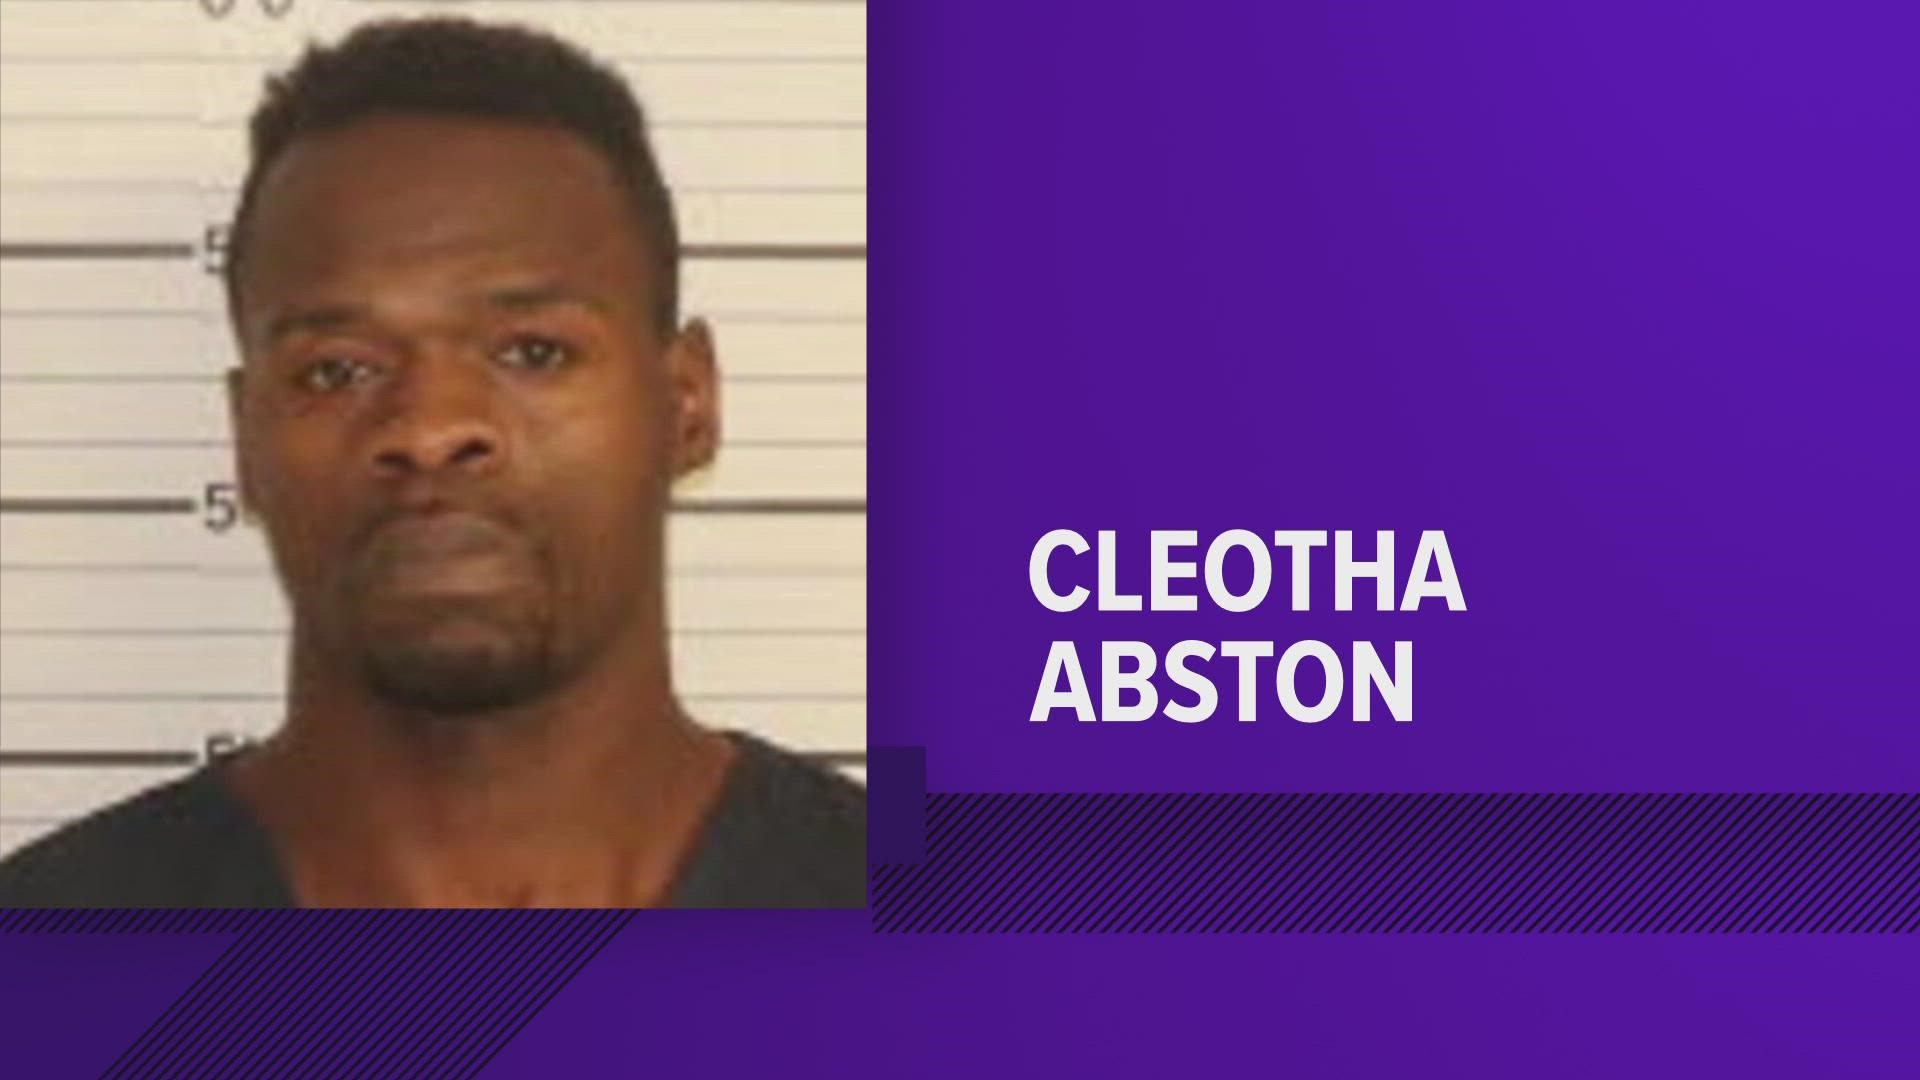 According to Shelby County jail records, charges faced by Cleotha Abston now include identify theft, theft of property, and credit card fraud.